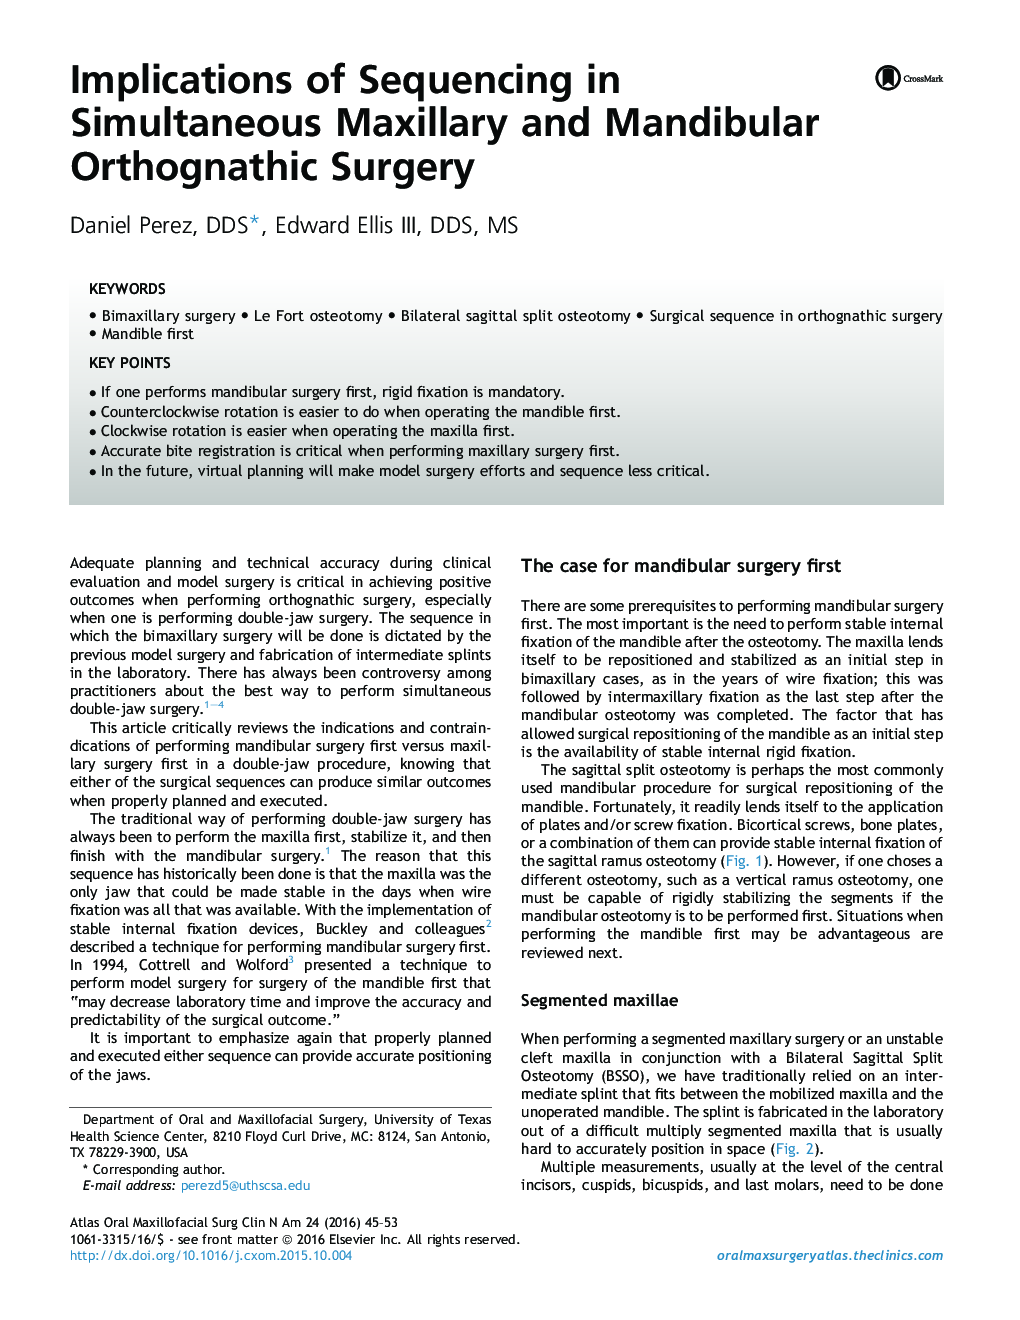 Implications of Sequencing in Simultaneous Maxillary and Mandibular Orthognathic Surgery